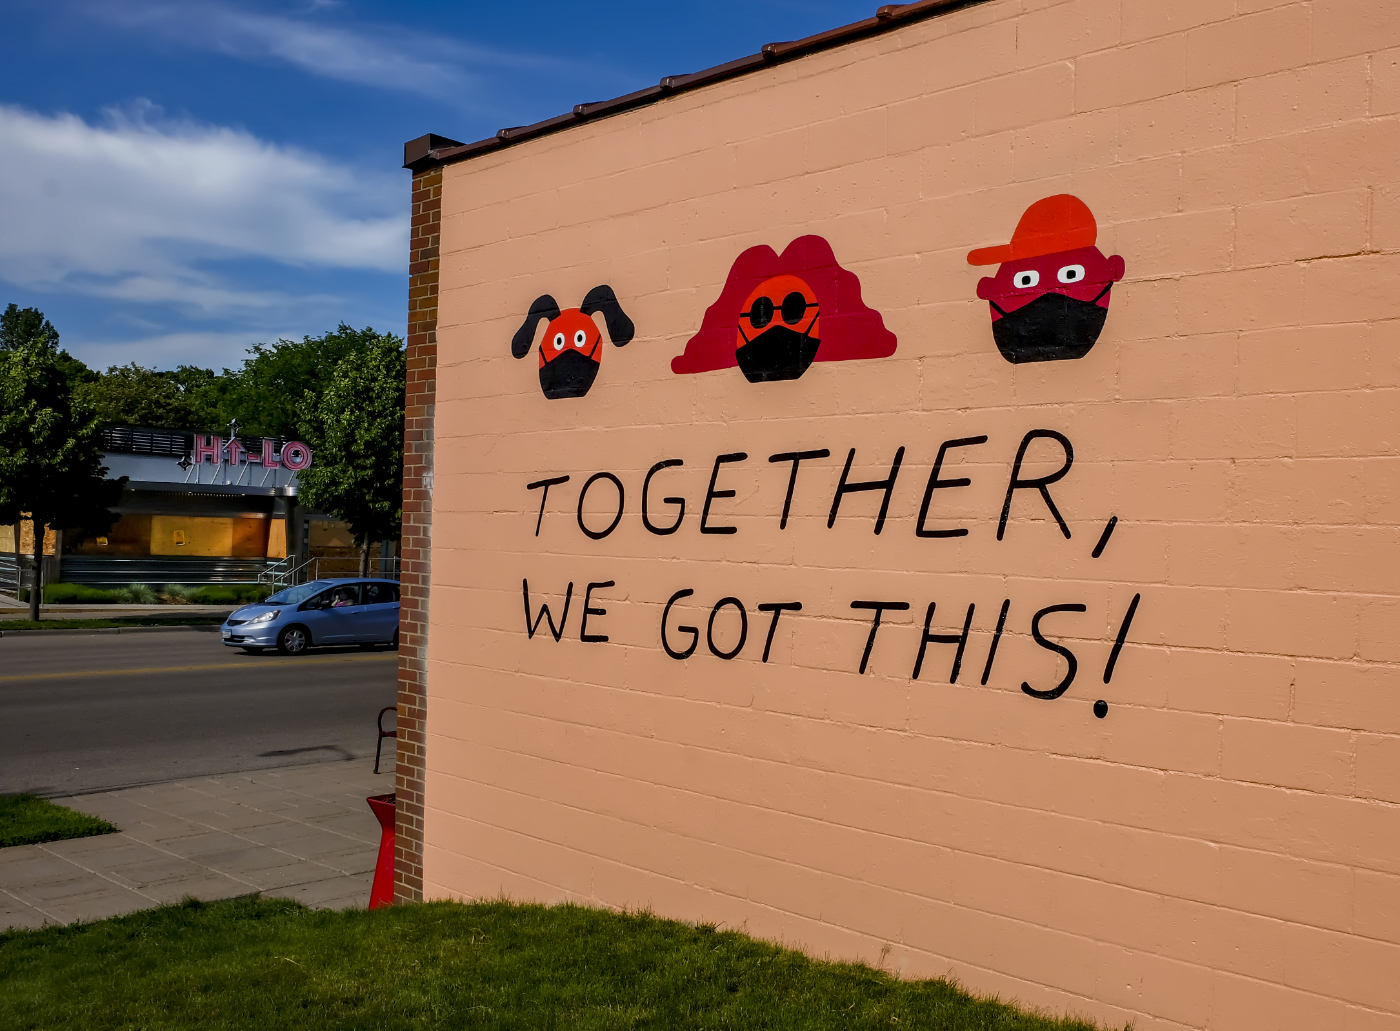 side of building with light brown cinderblock walls painted with graphics of dog, woman, and man wearing masks with the phrase "Together, We Got This!" and street scene in background with Hi-Lo sign on a buidling